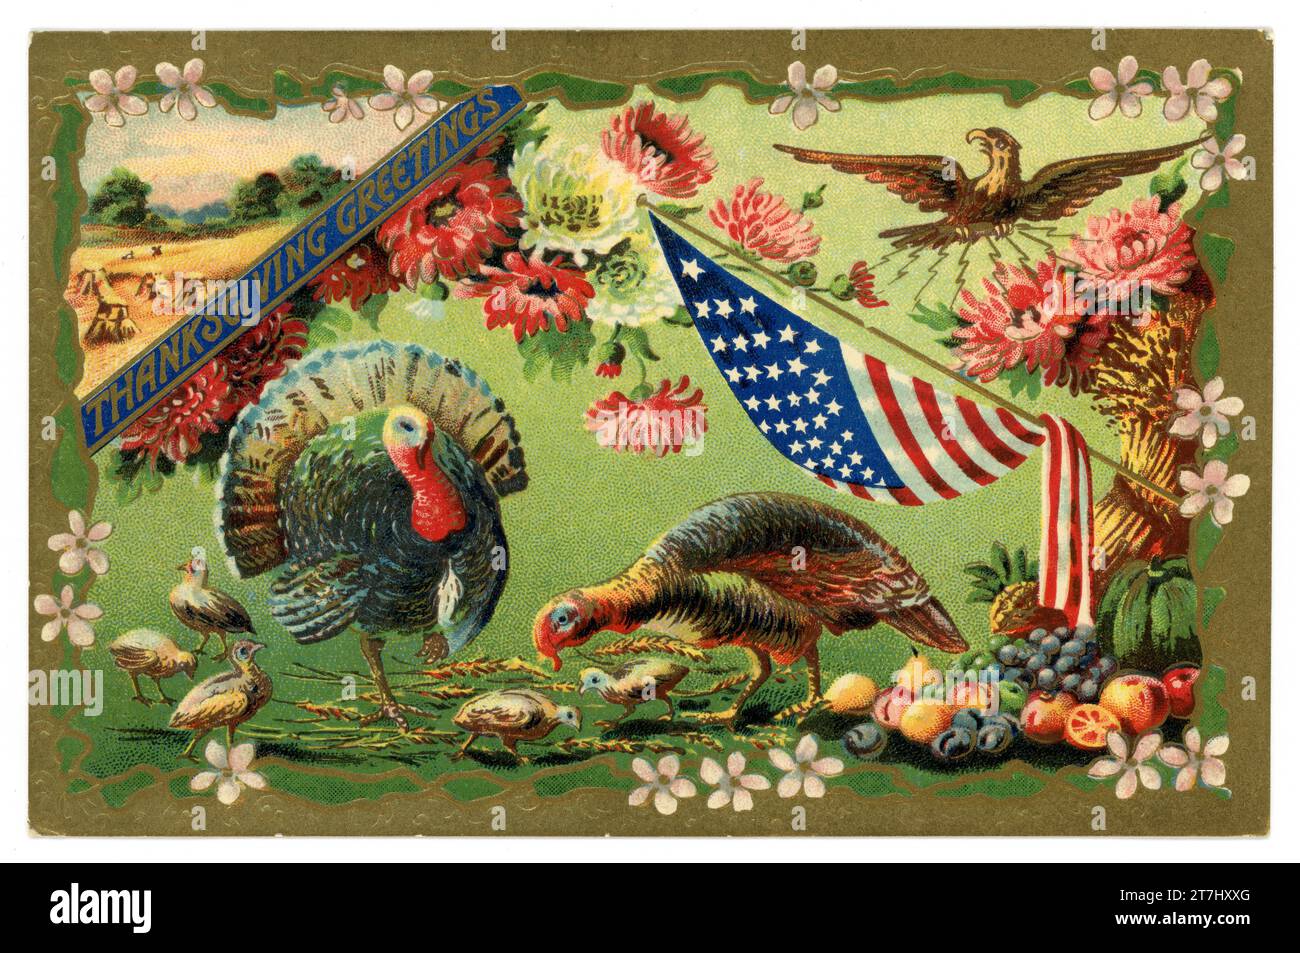 Original and typical old fashioned, beautiful embossed postcard of American thanksgiving day turkey, stars & stripes, eagle, with a gold border. Dated to circa 1911, U.S.A. Stock Photo